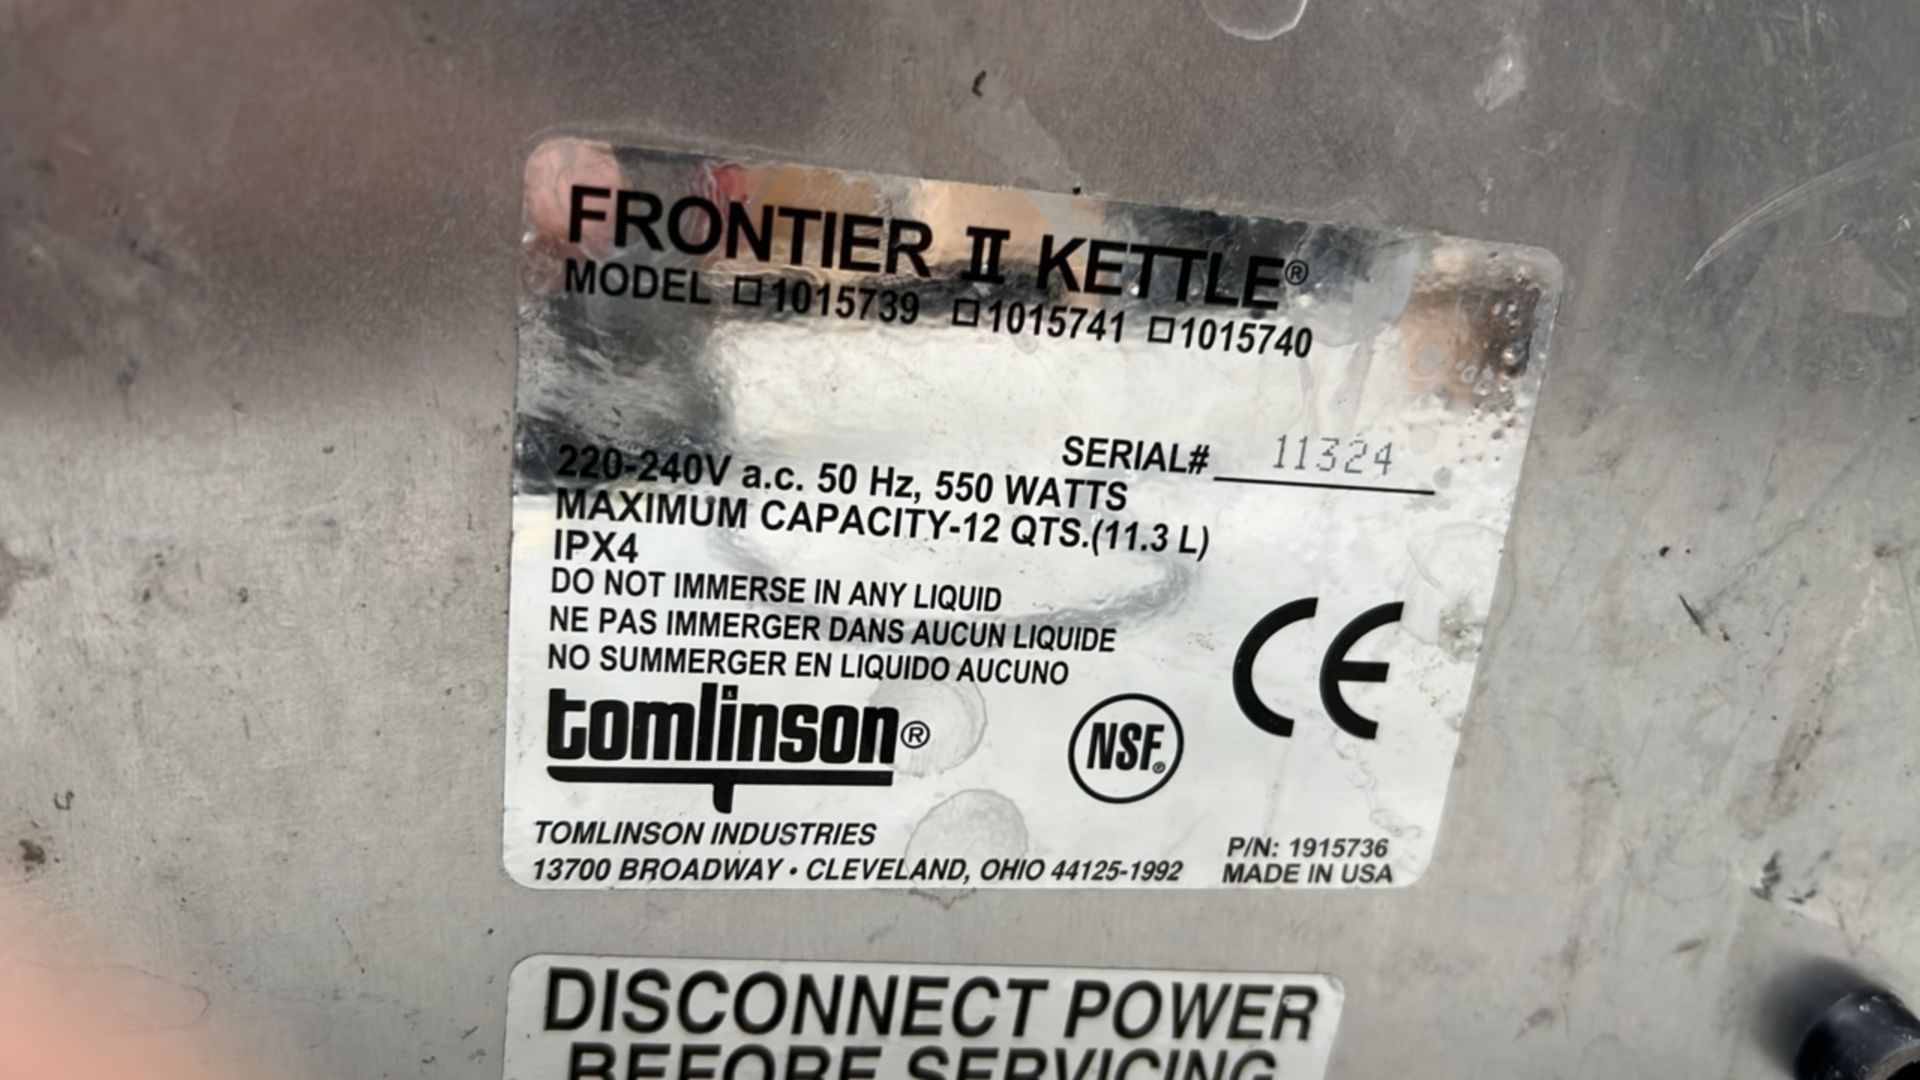 Frontier 2 Kettle - Image 5 of 5